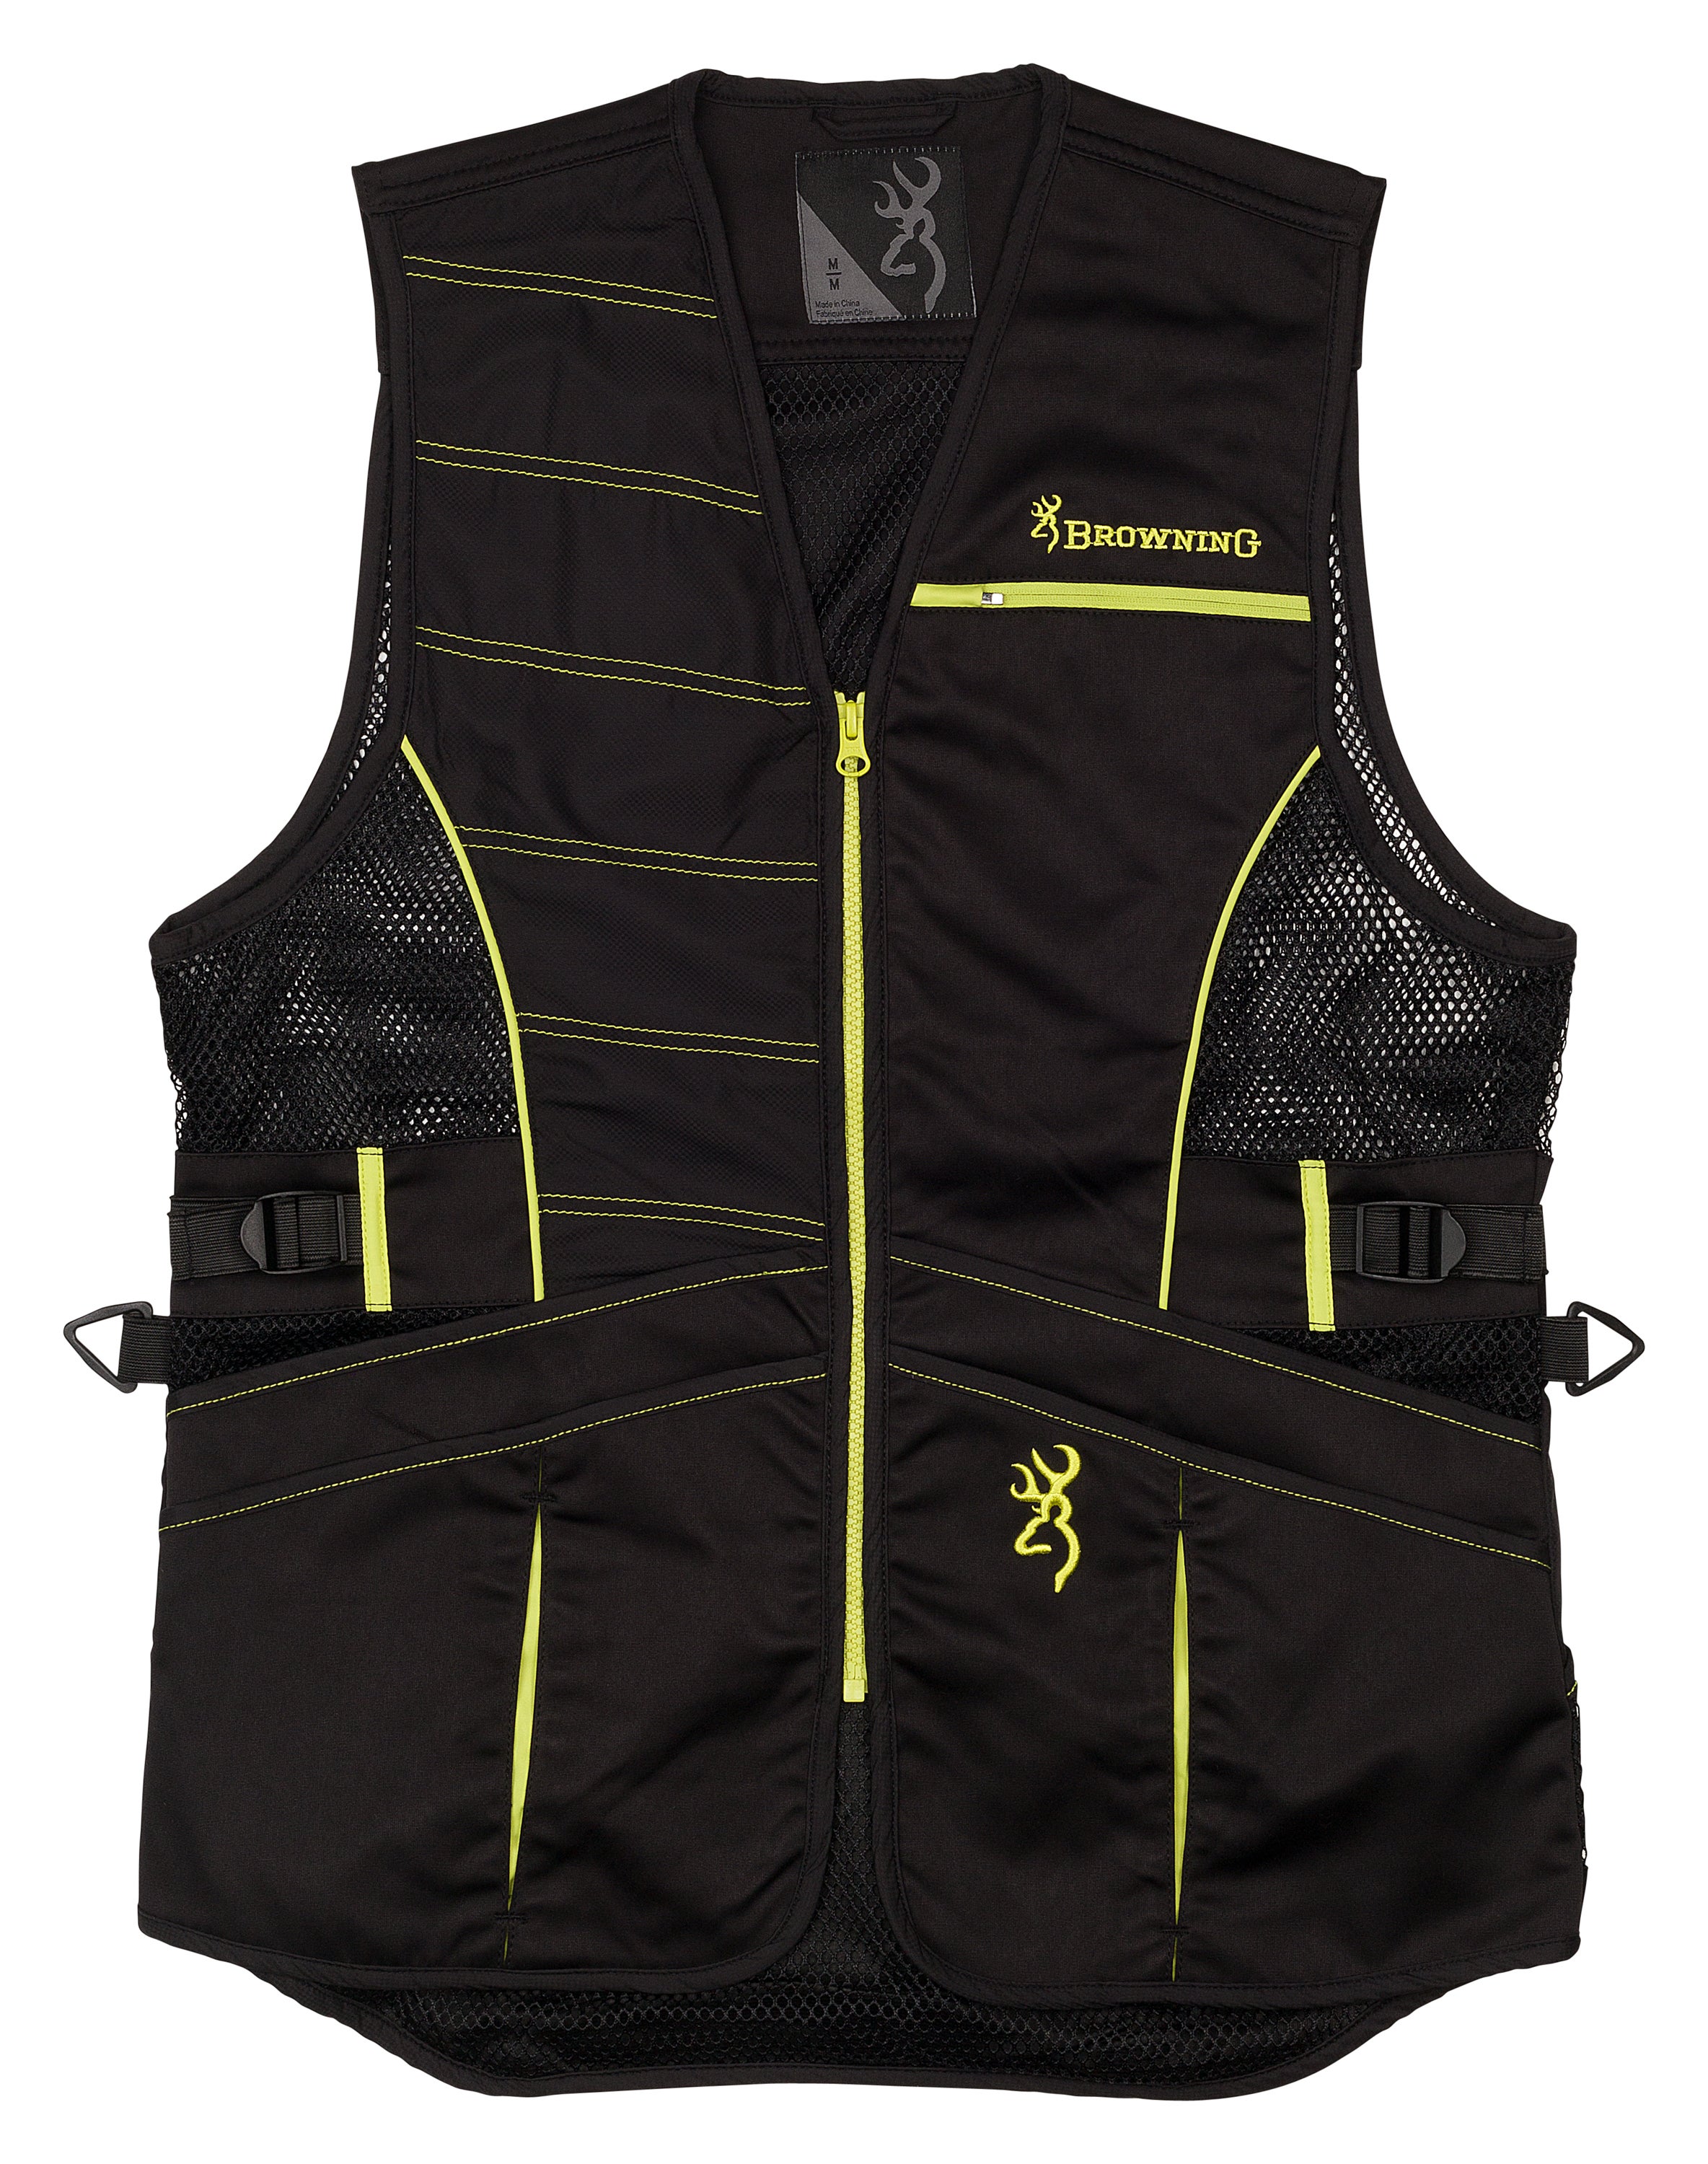 Women's Ace Shooting Vest - Browning